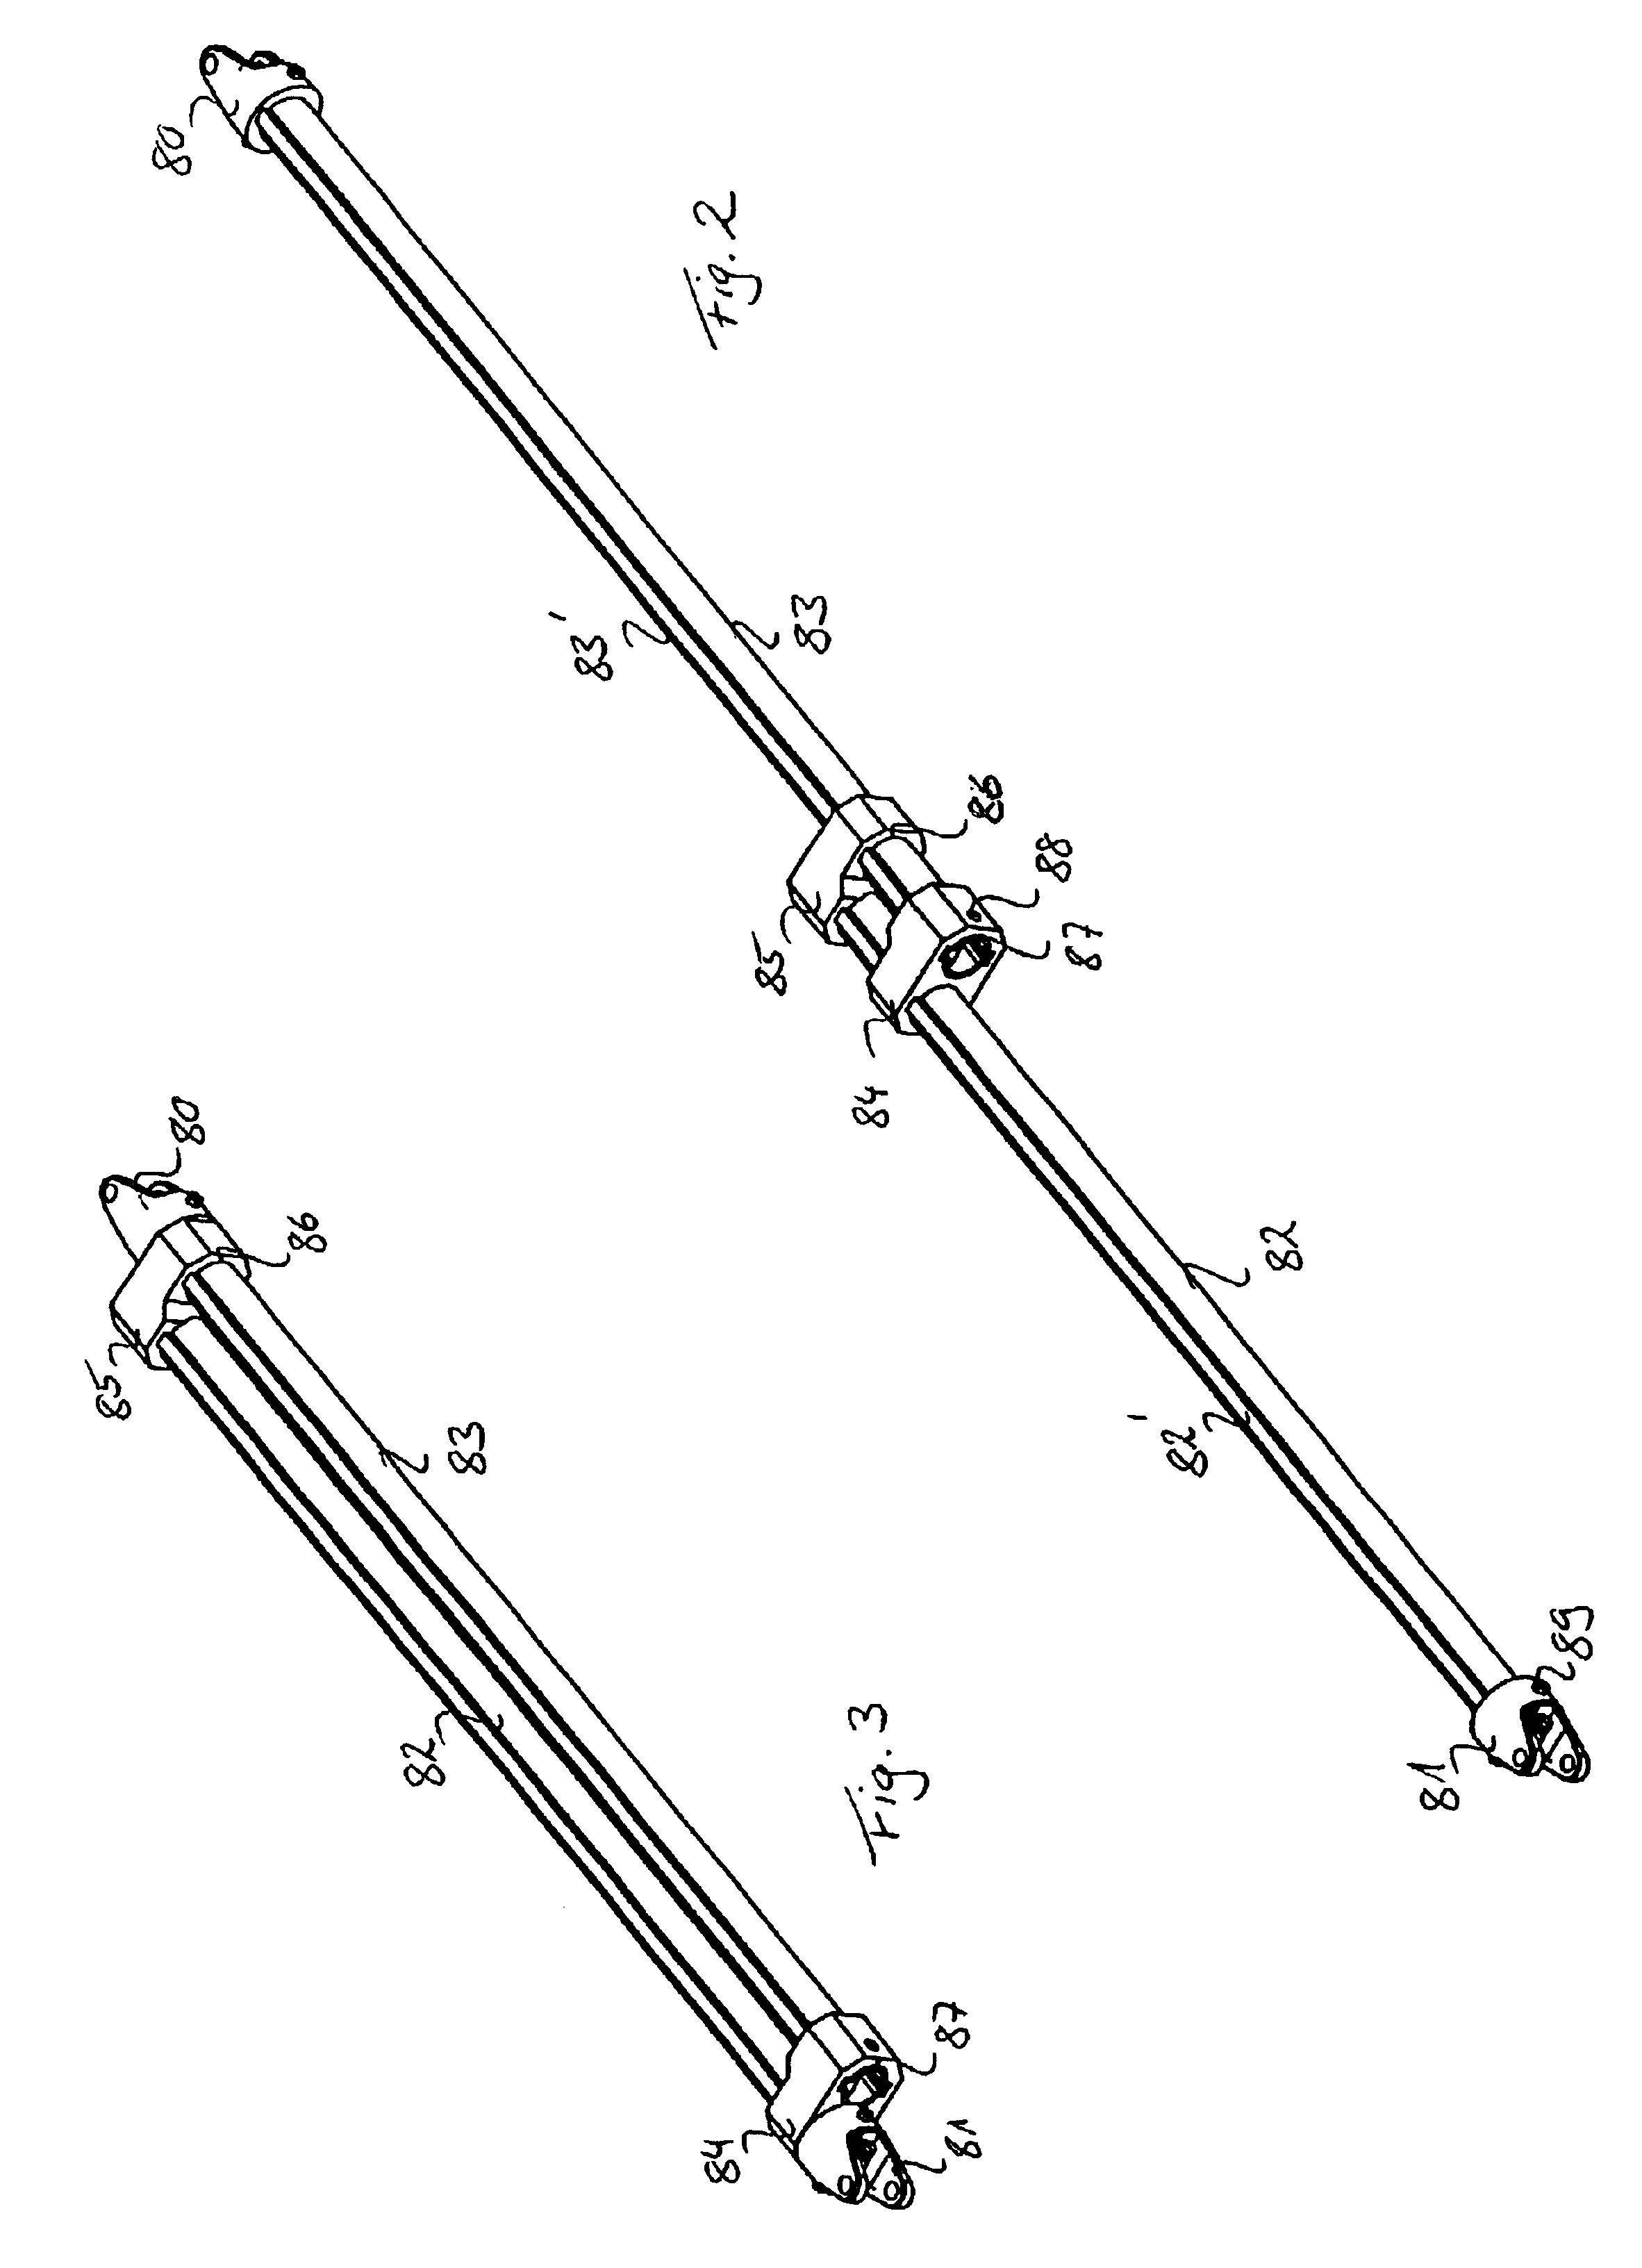 Device for transmitting torque